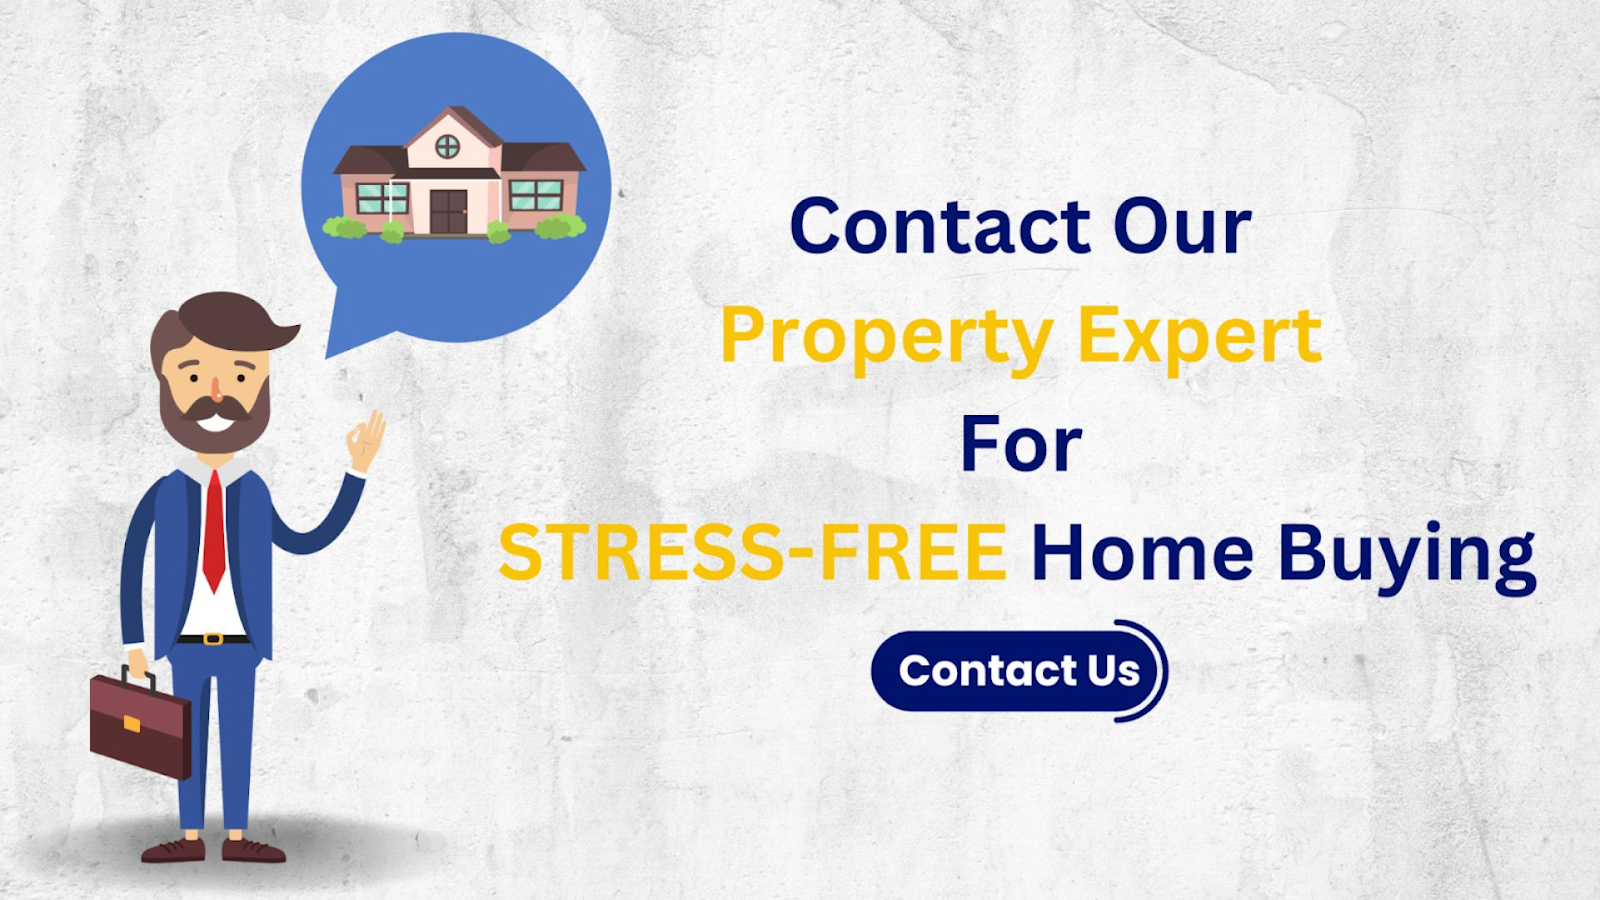 Contact a property expert for stress-free and easy home buying.